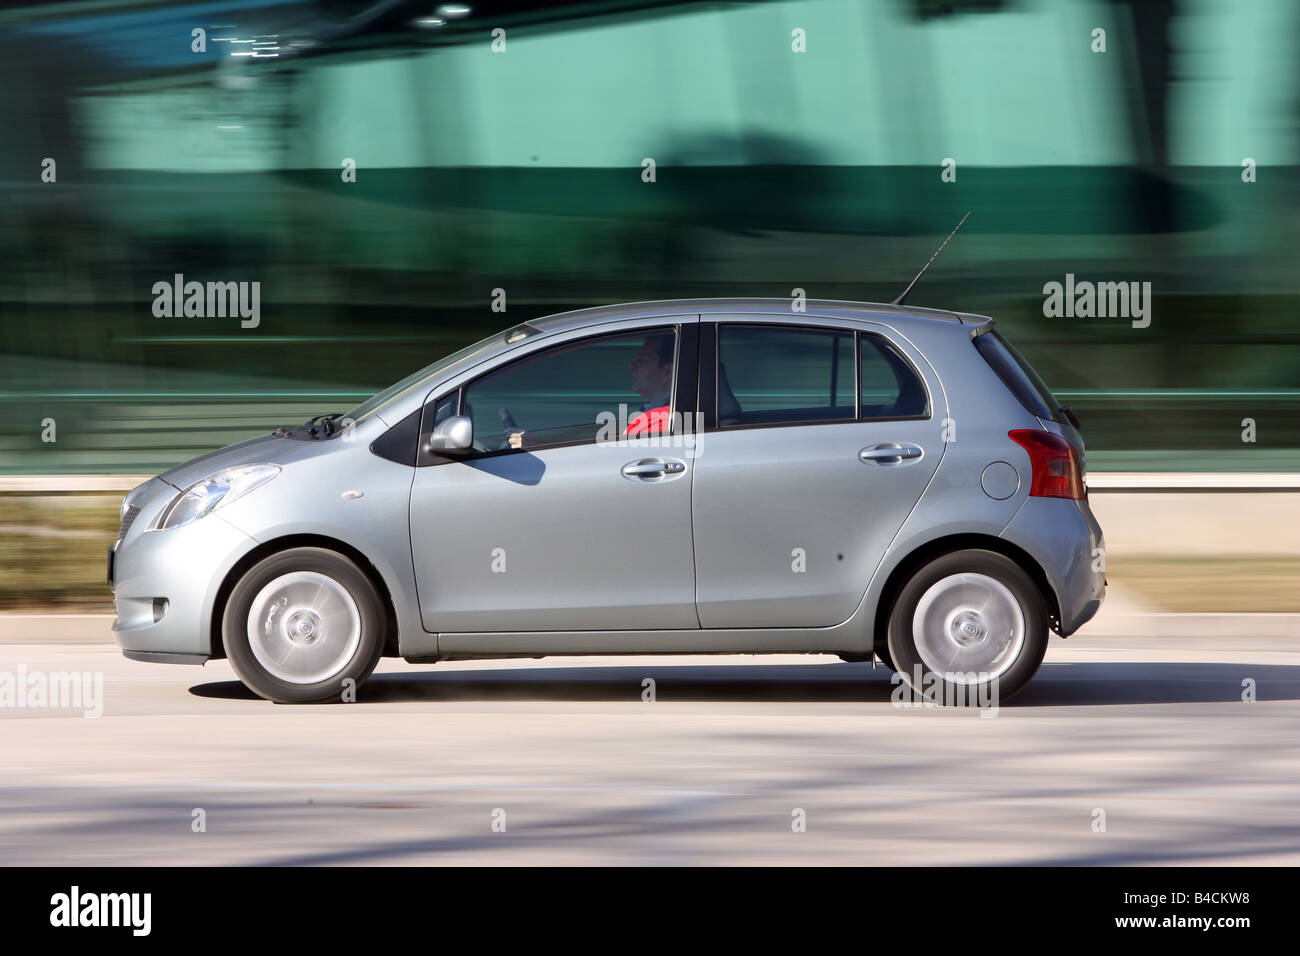 Toyota Yaris 1.3 WT-i, model year 2005-, silver, driving, side view, City Stock Photo